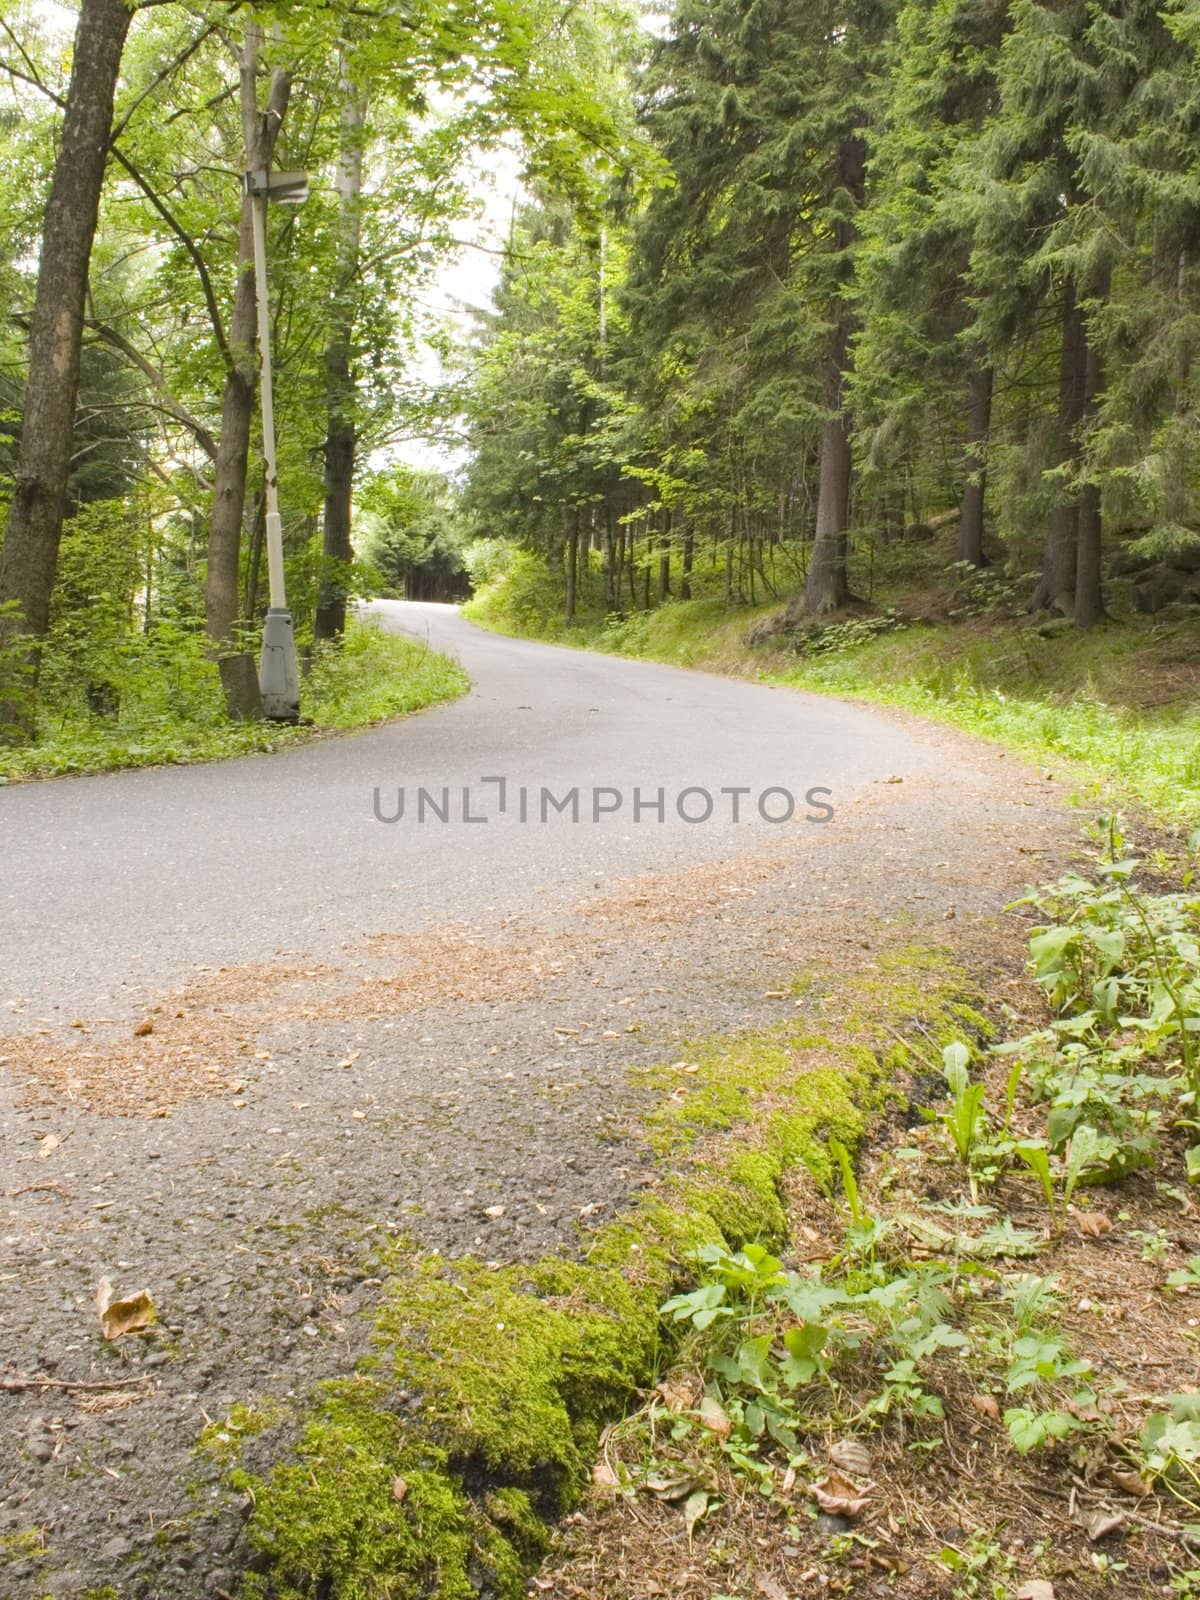 a small winding mountain road in the woods